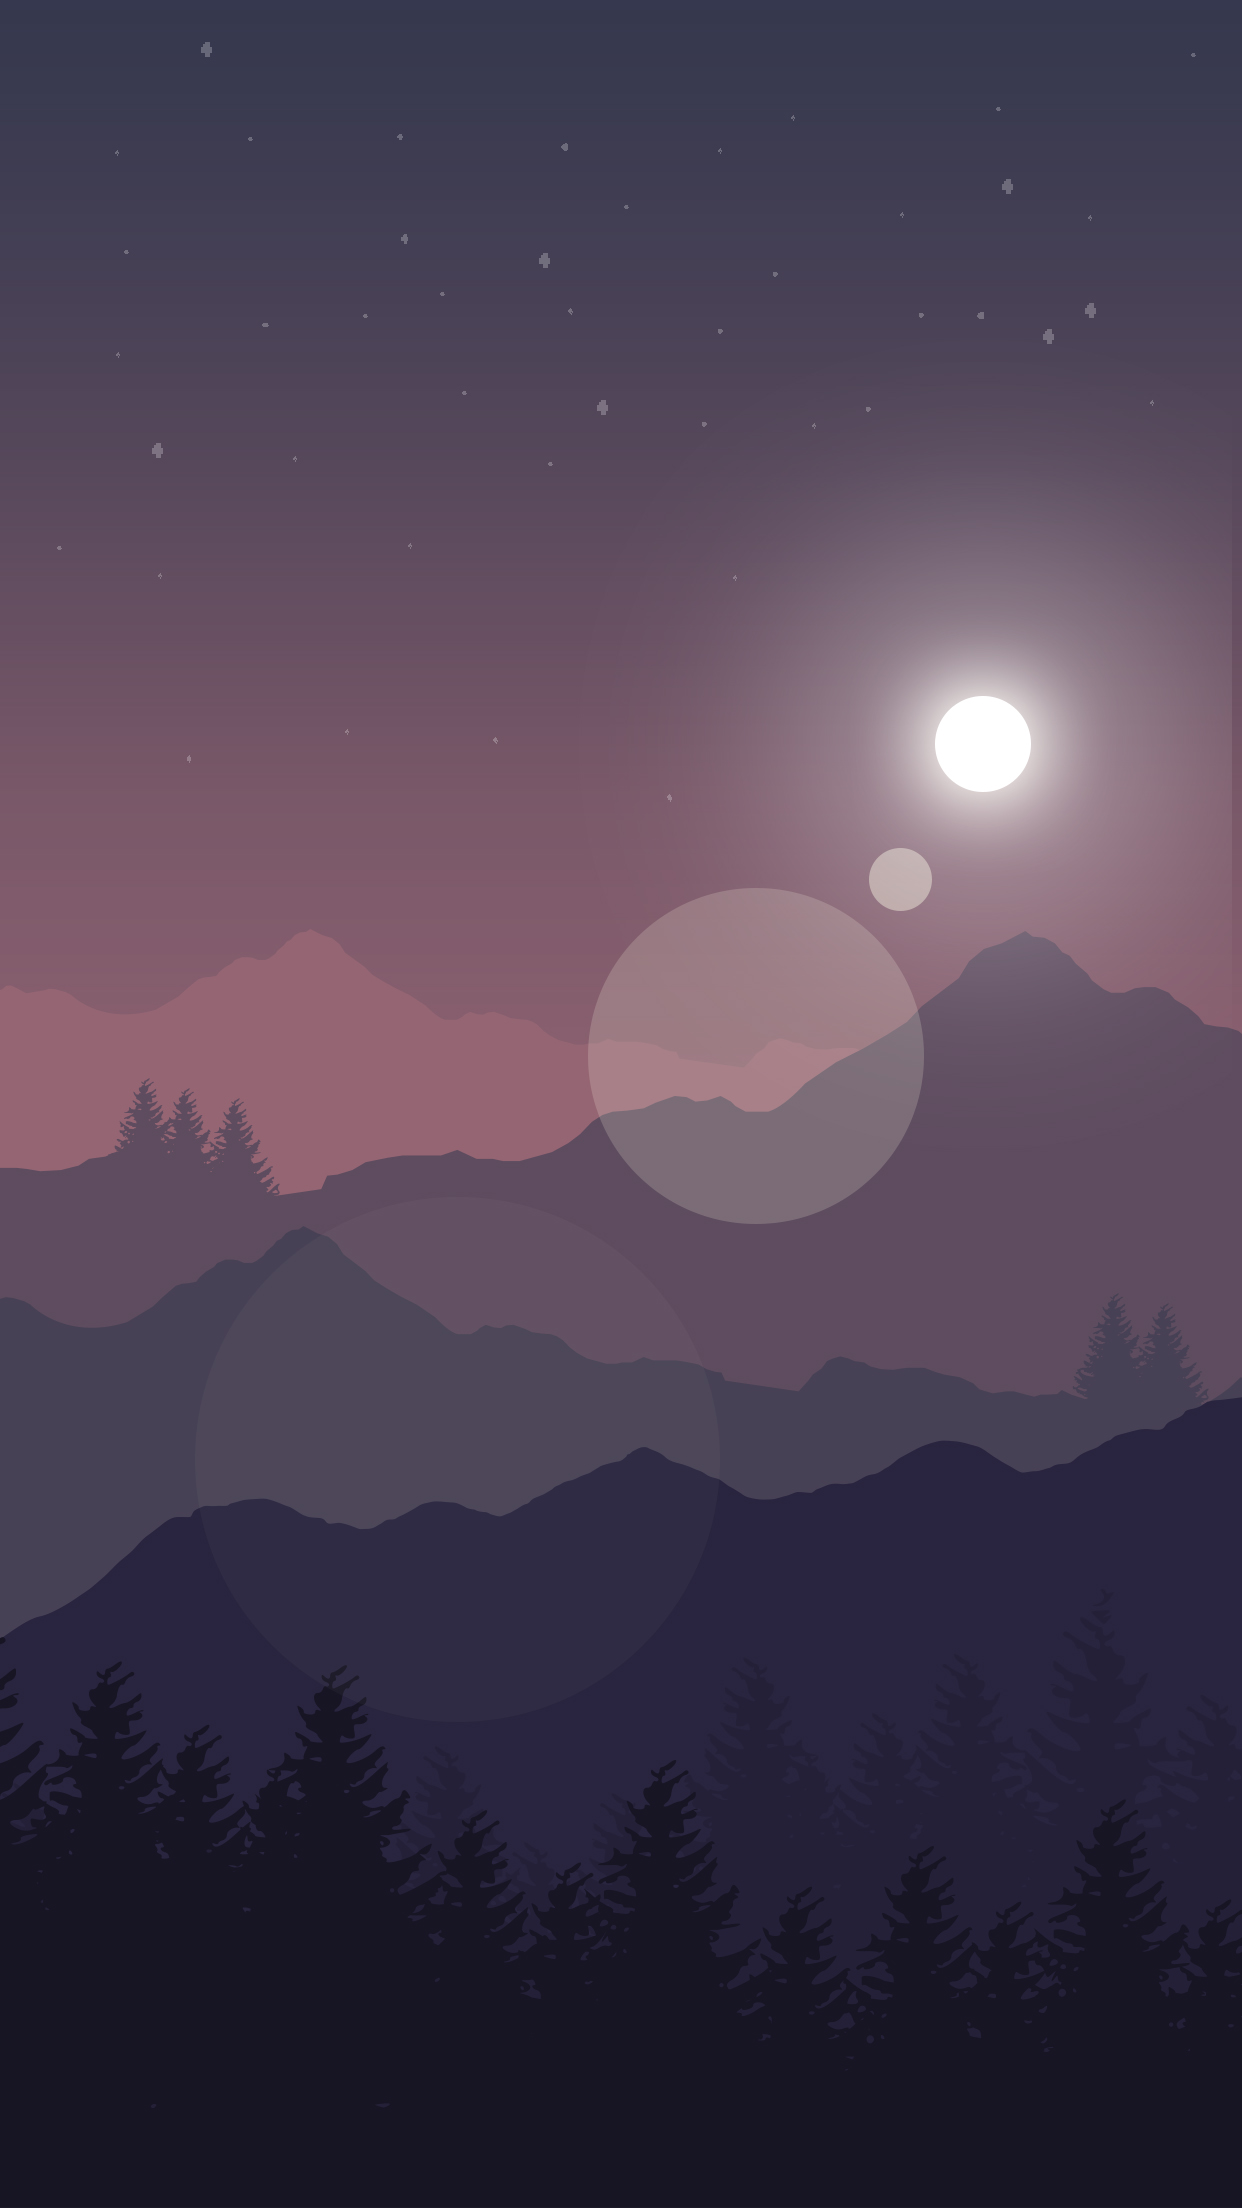 digital art, Nature, Mountains, Portrait display, Trees, Forest, Moon